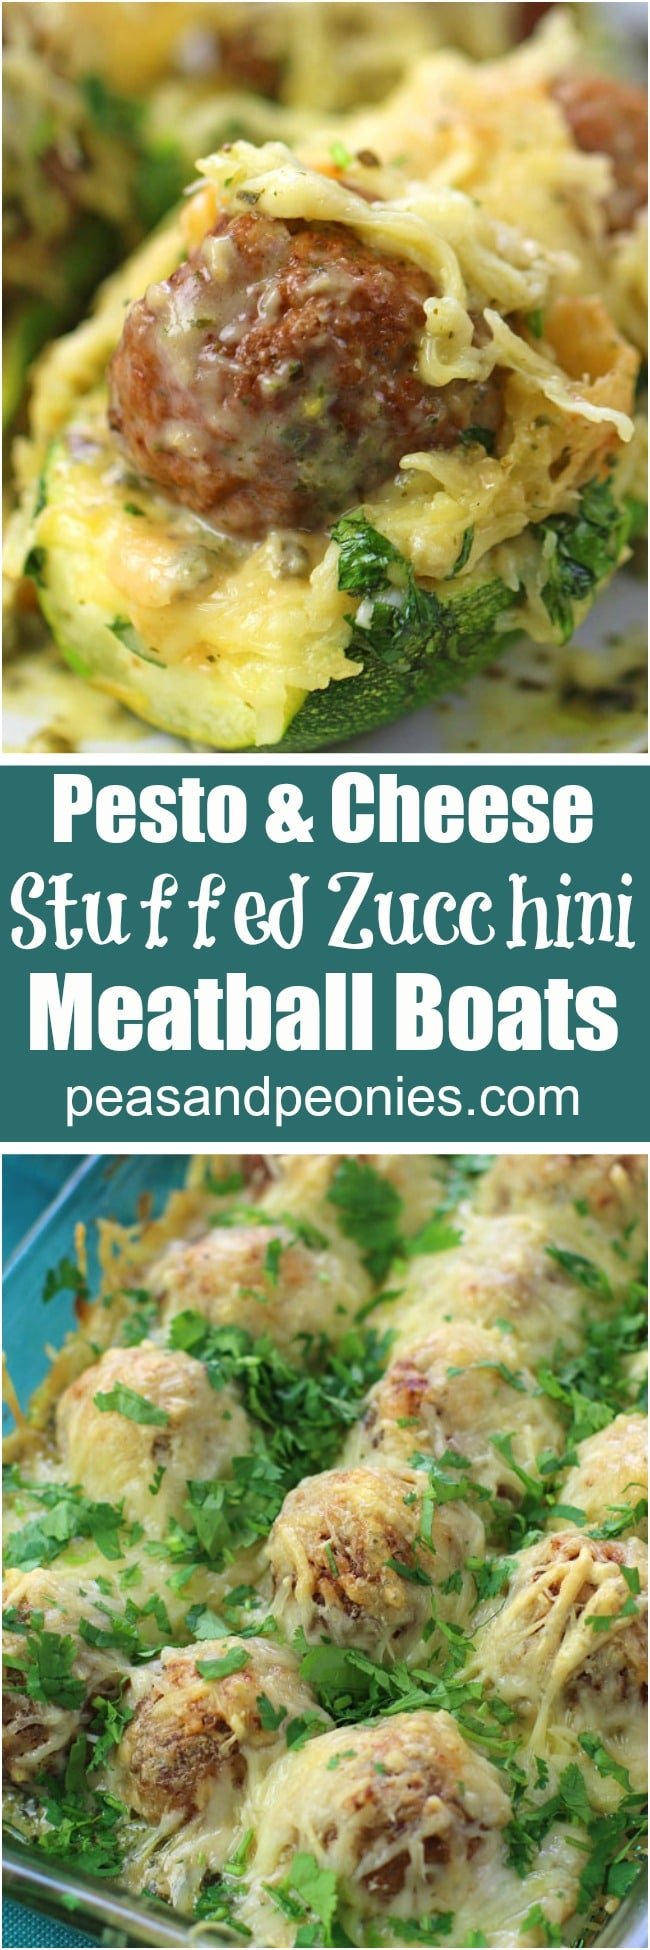 Meatball Zucchini Boats are stuffed with pesto, juicy meatballs and topped with Alfredo sauce and lots of cheese, for a quick and delicious dinner or easy appetizer.